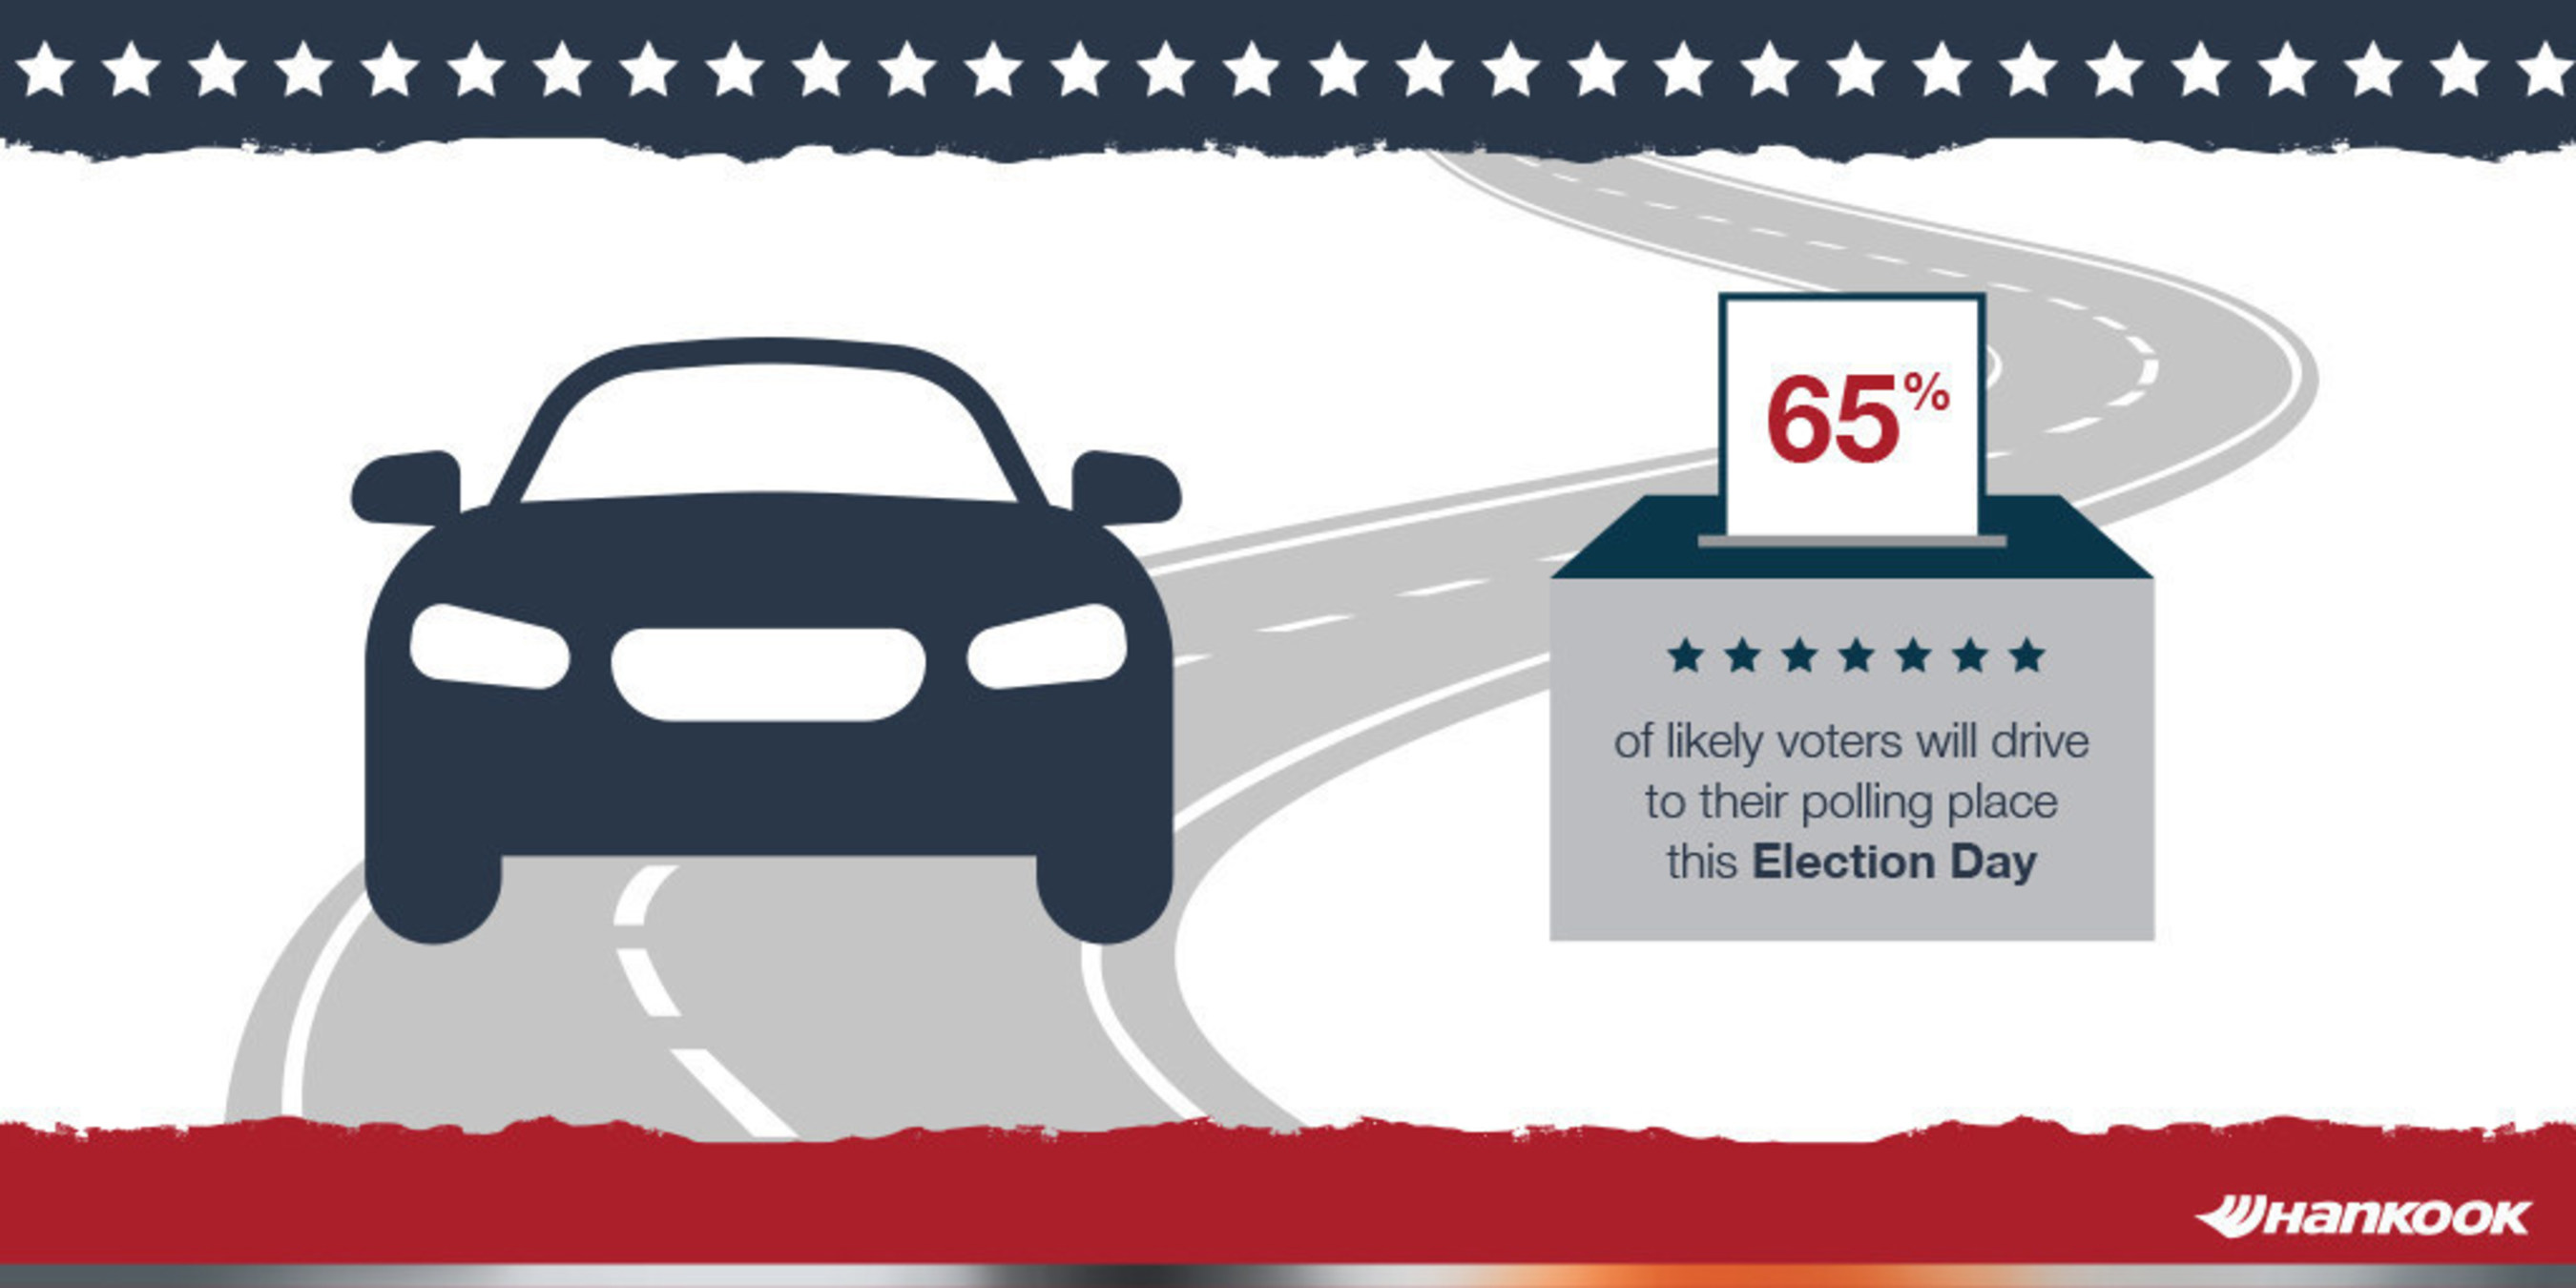 According to the Hankook Tire Gauge Index, 65% of likely voters will drive to their polling place this Election Day.